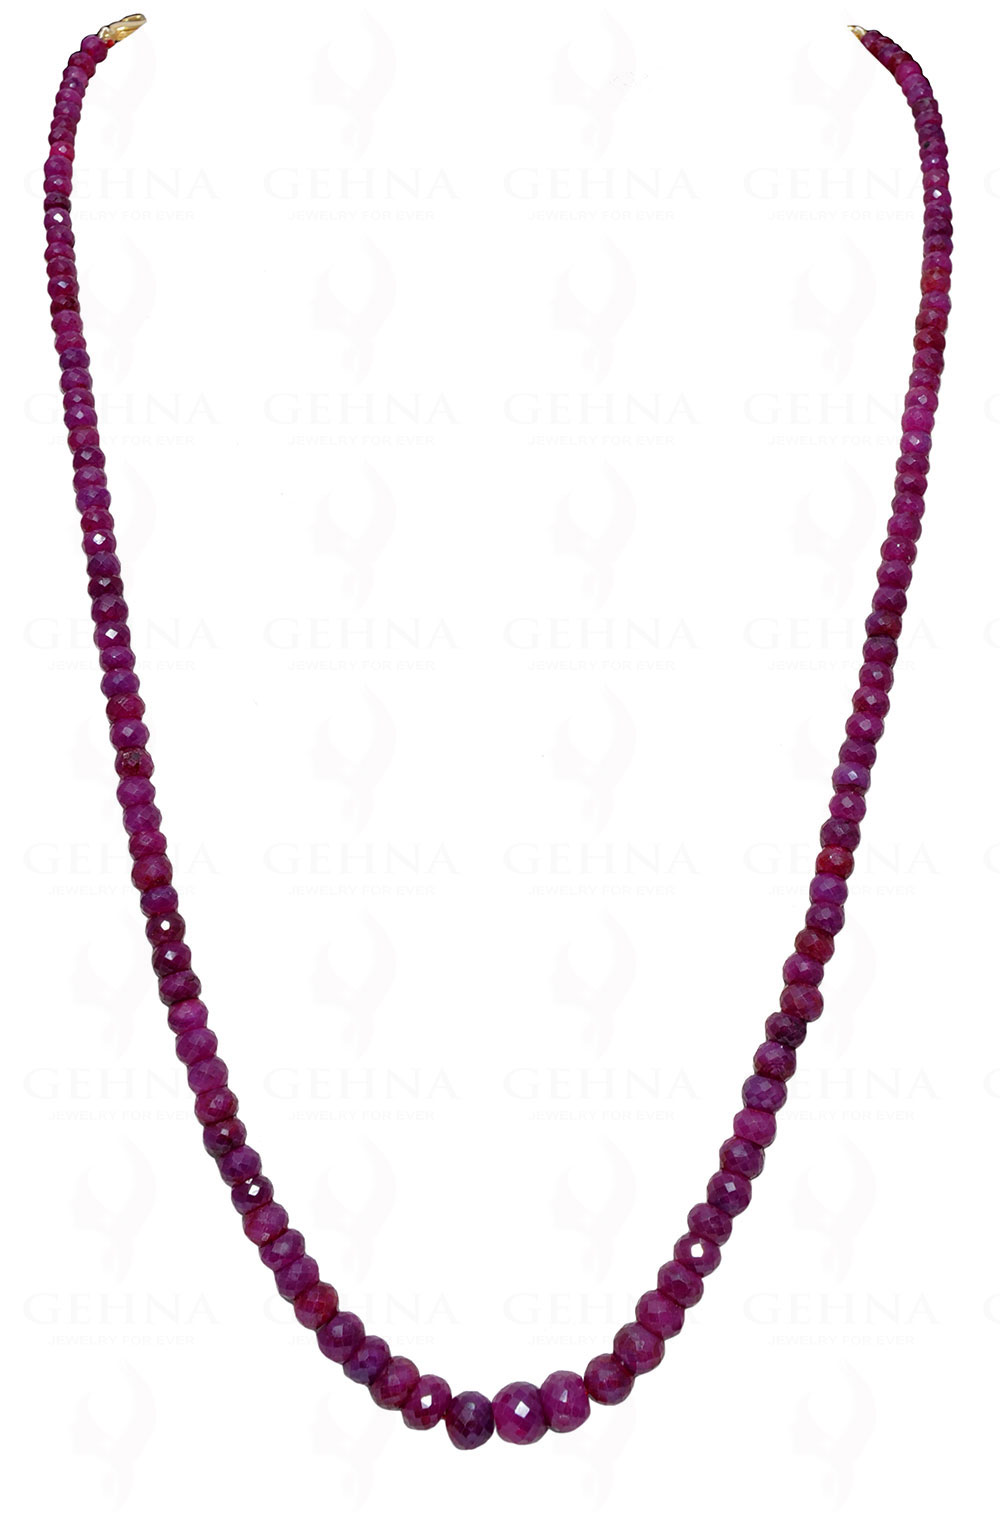 22″ Inches Ruby Gemstone Faceted Bead Necklace NP-1343